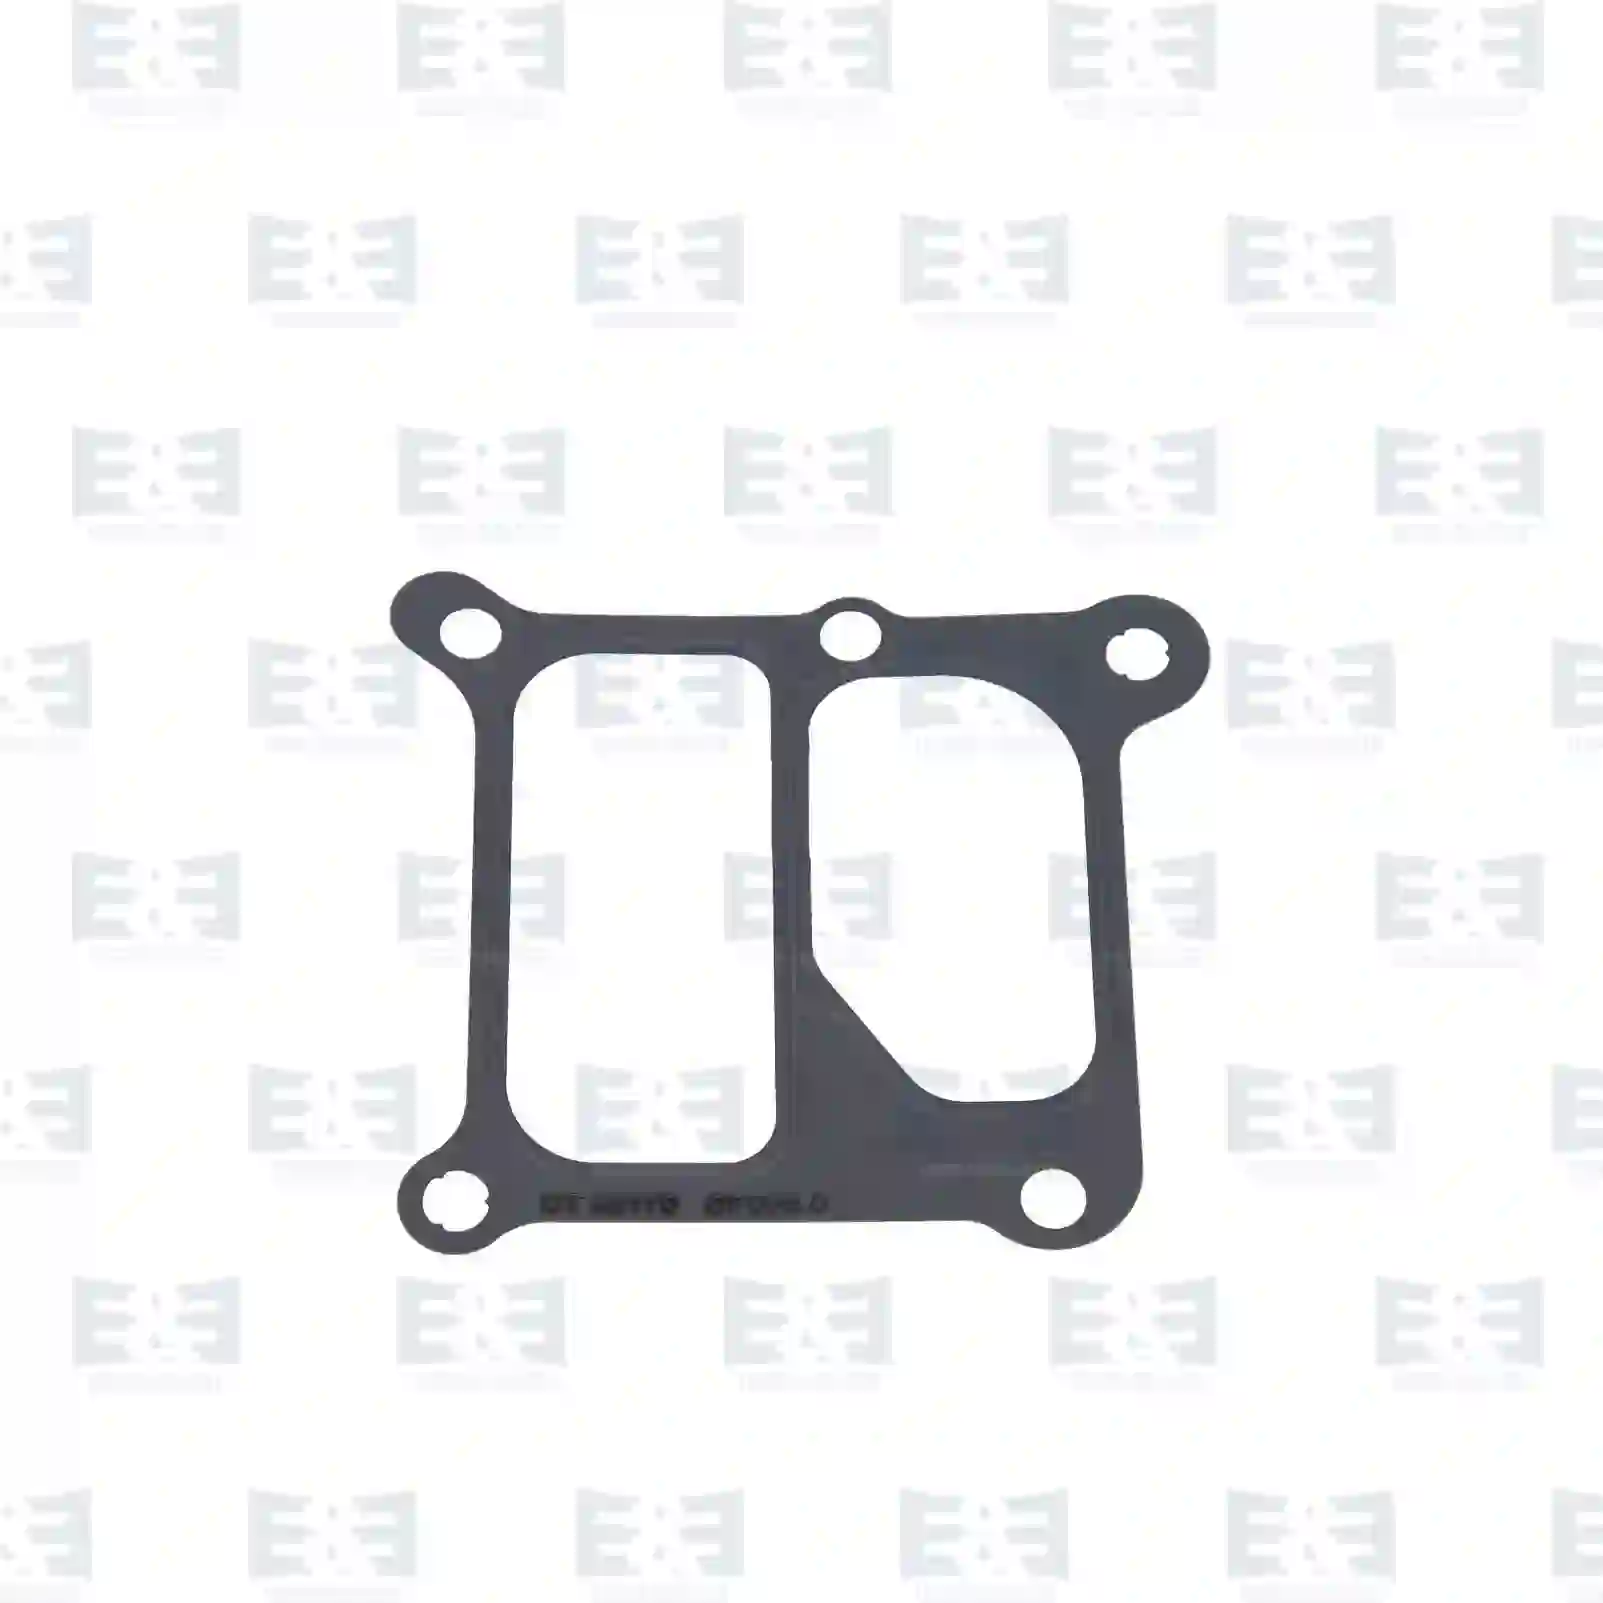 Gasket, cooling water pipe, 2E2201836, 7403161465, 3161465, ZG01173-0008 ||  2E2201836 E&E Truck Spare Parts | Truck Spare Parts, Auotomotive Spare Parts Gasket, cooling water pipe, 2E2201836, 7403161465, 3161465, ZG01173-0008 ||  2E2201836 E&E Truck Spare Parts | Truck Spare Parts, Auotomotive Spare Parts